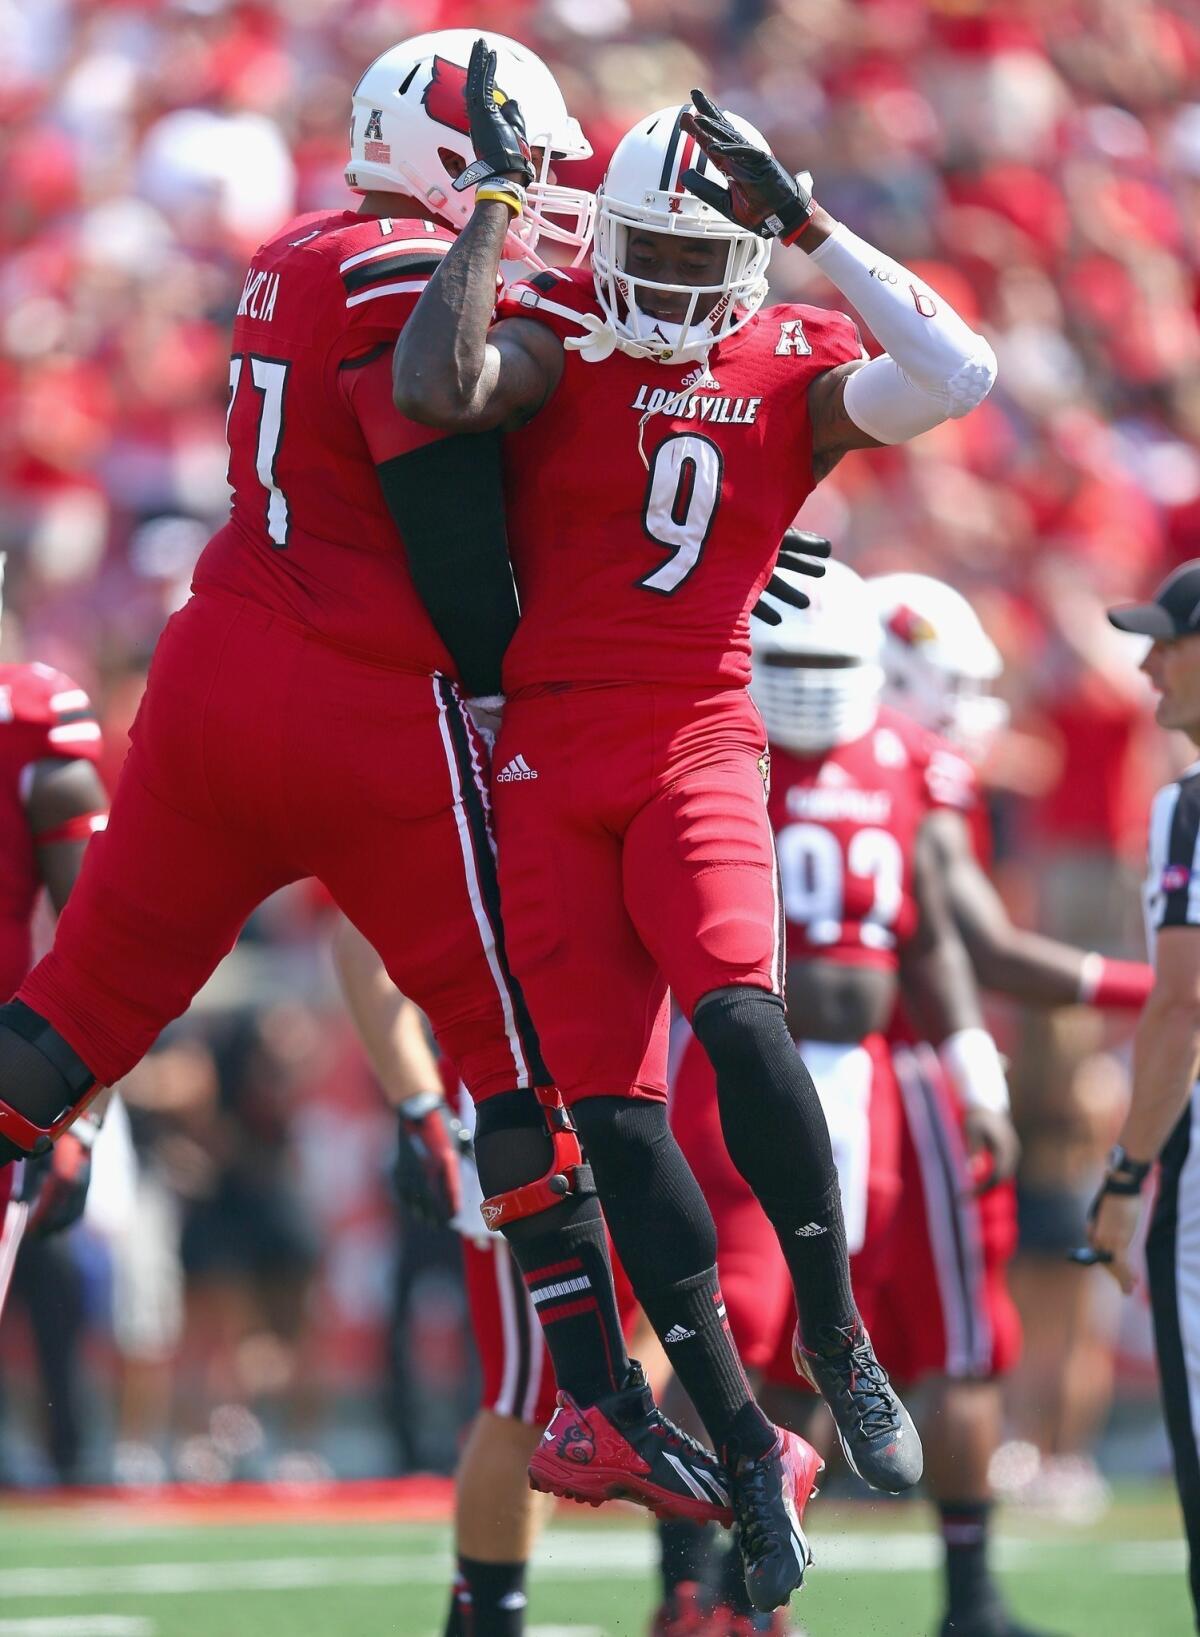 Louisville looks to stay undefeated on the season when they line up to play Kentucky on Saturday.